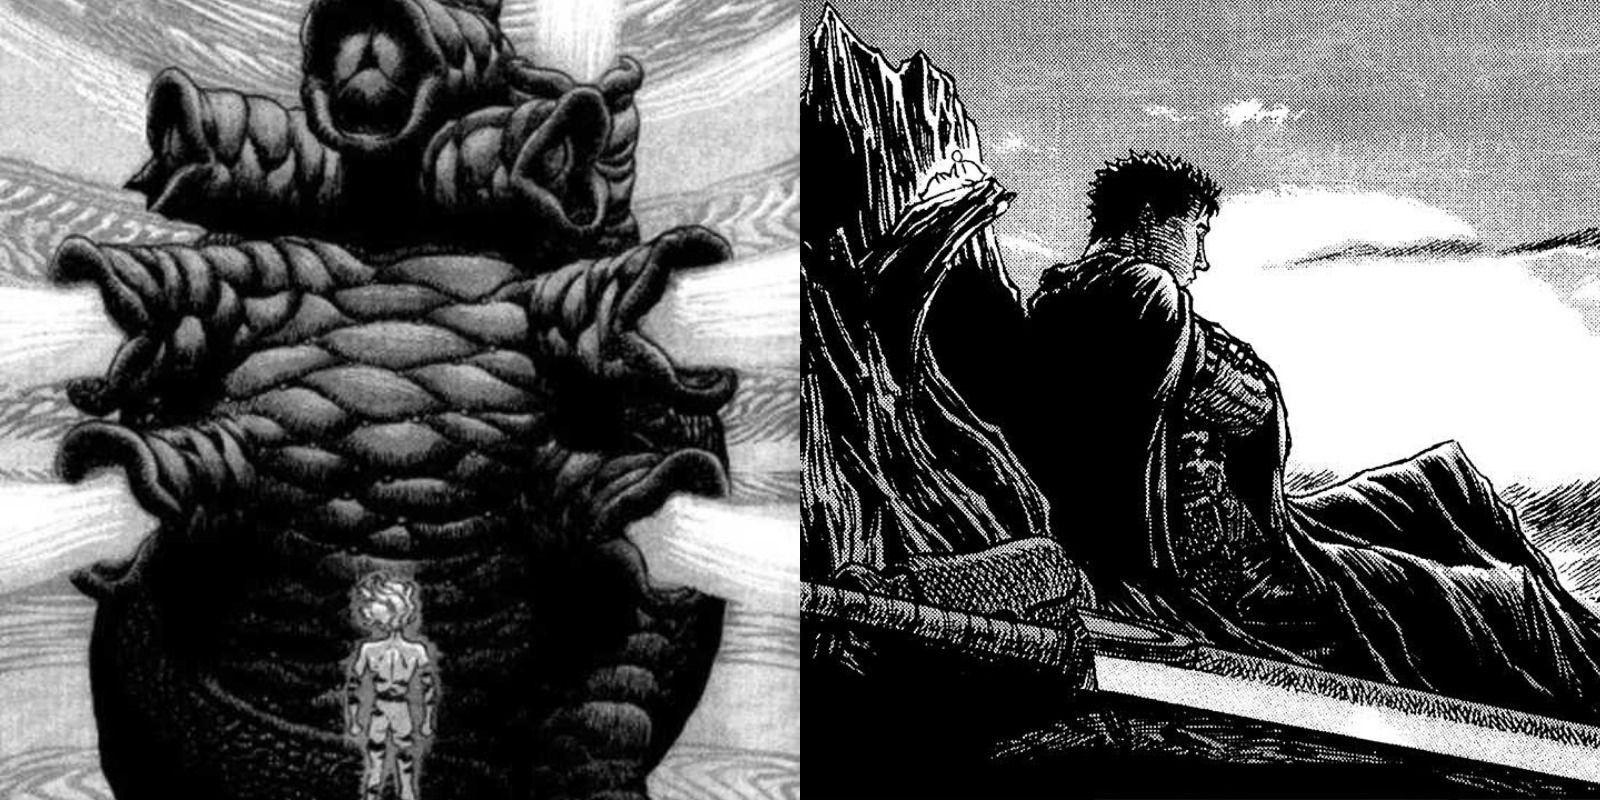 Griffith conversing with the Idea in a cut chapter of the manga, and Guts resting